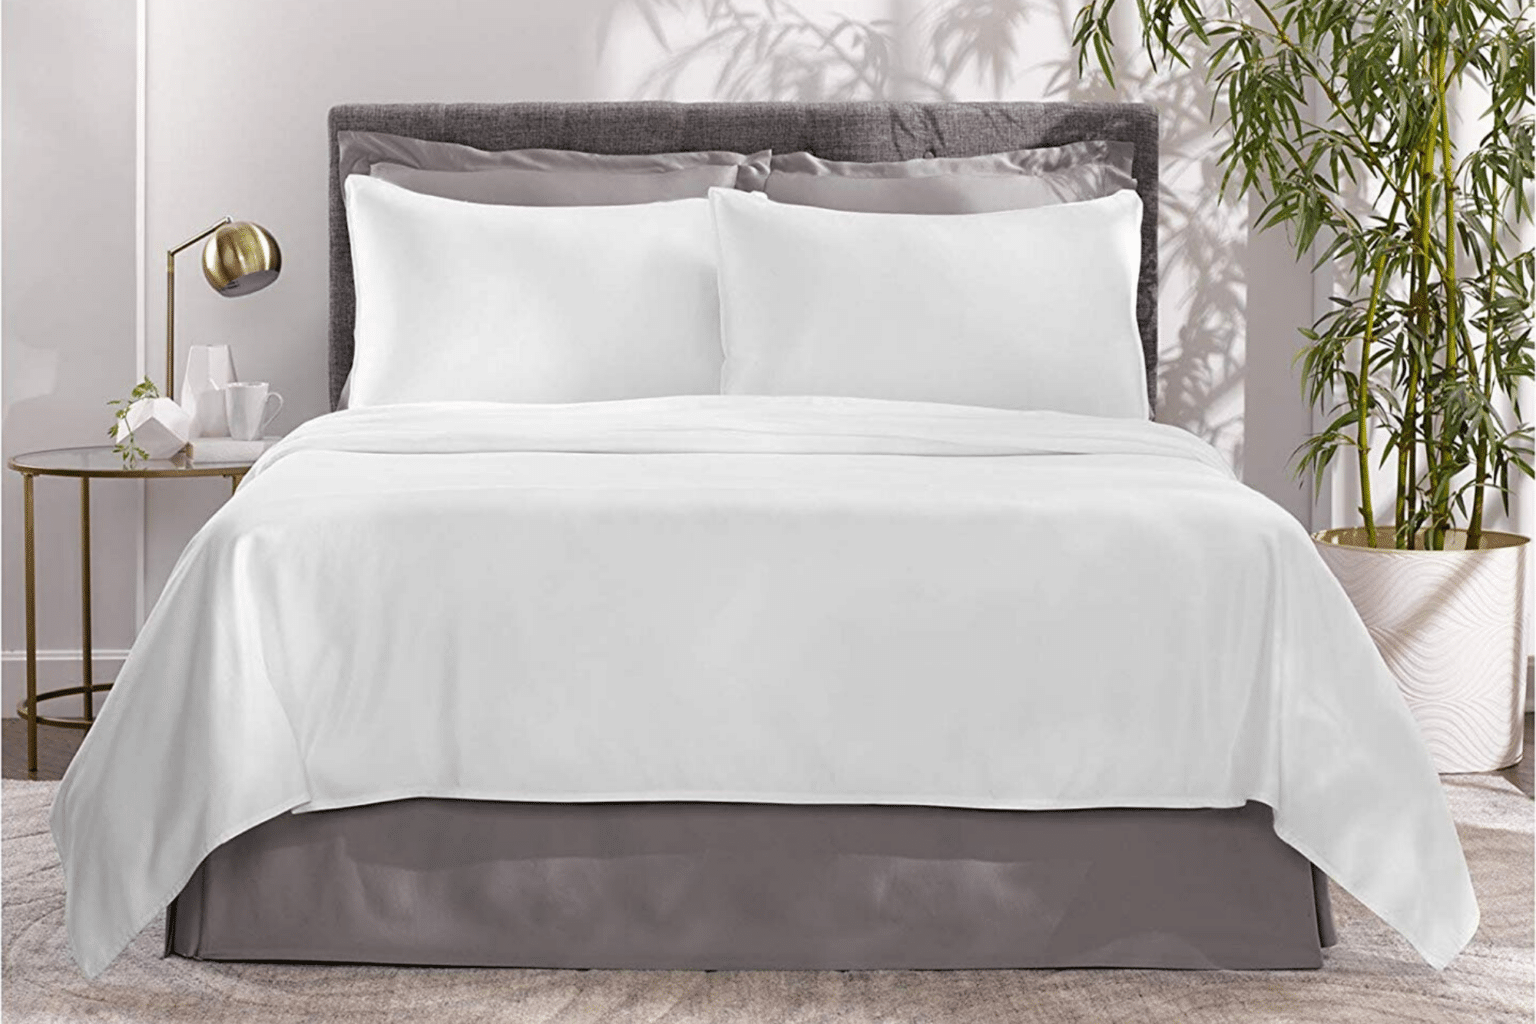 Best Organic Sheets 2023 - Our Top 10 Picks Compared